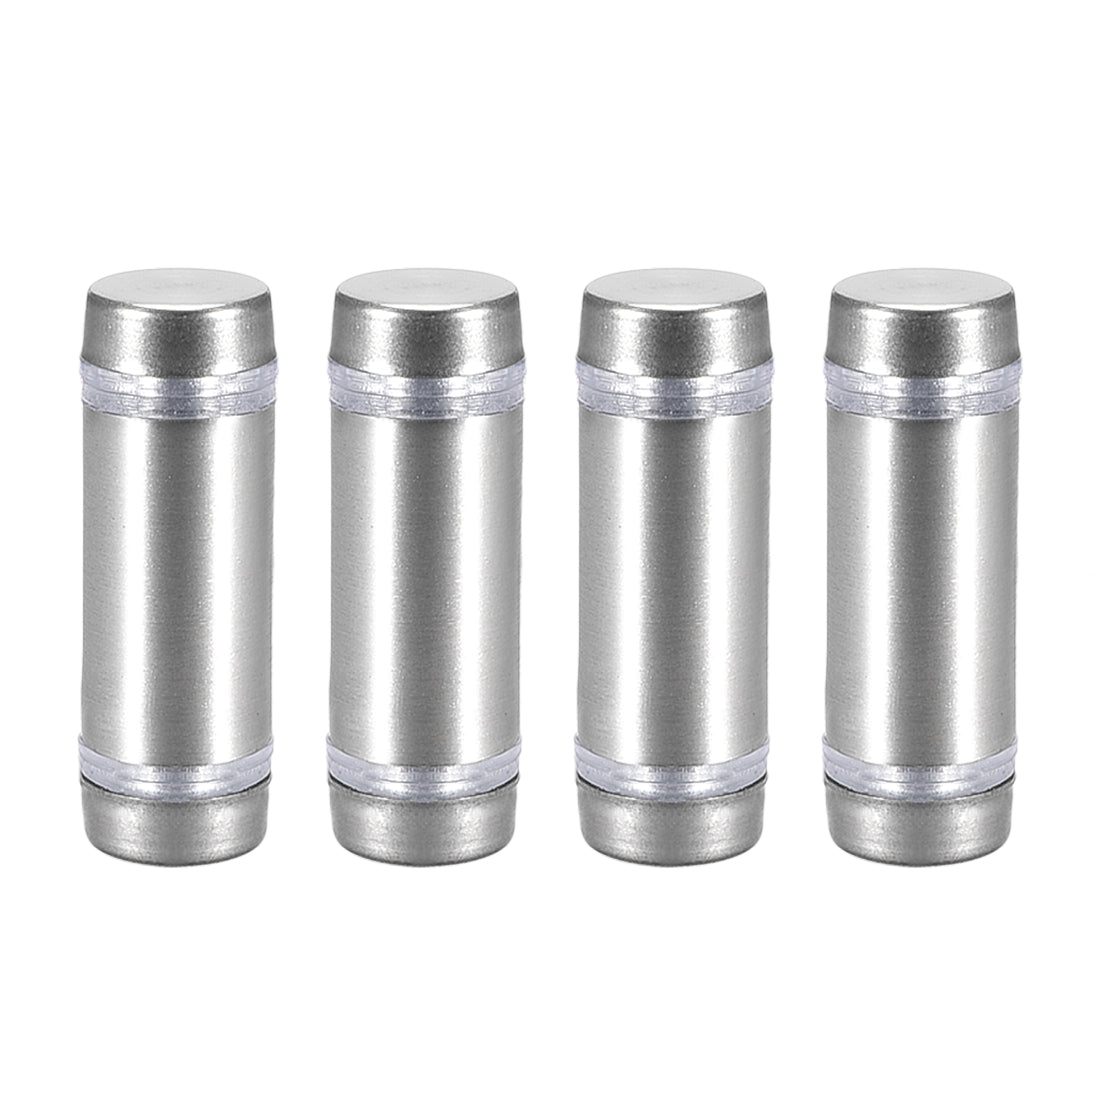 uxcell Uxcell Glass Standoff Double Head Stainless Steel Standoff Holder 12mm x 37mm 4 Pcs